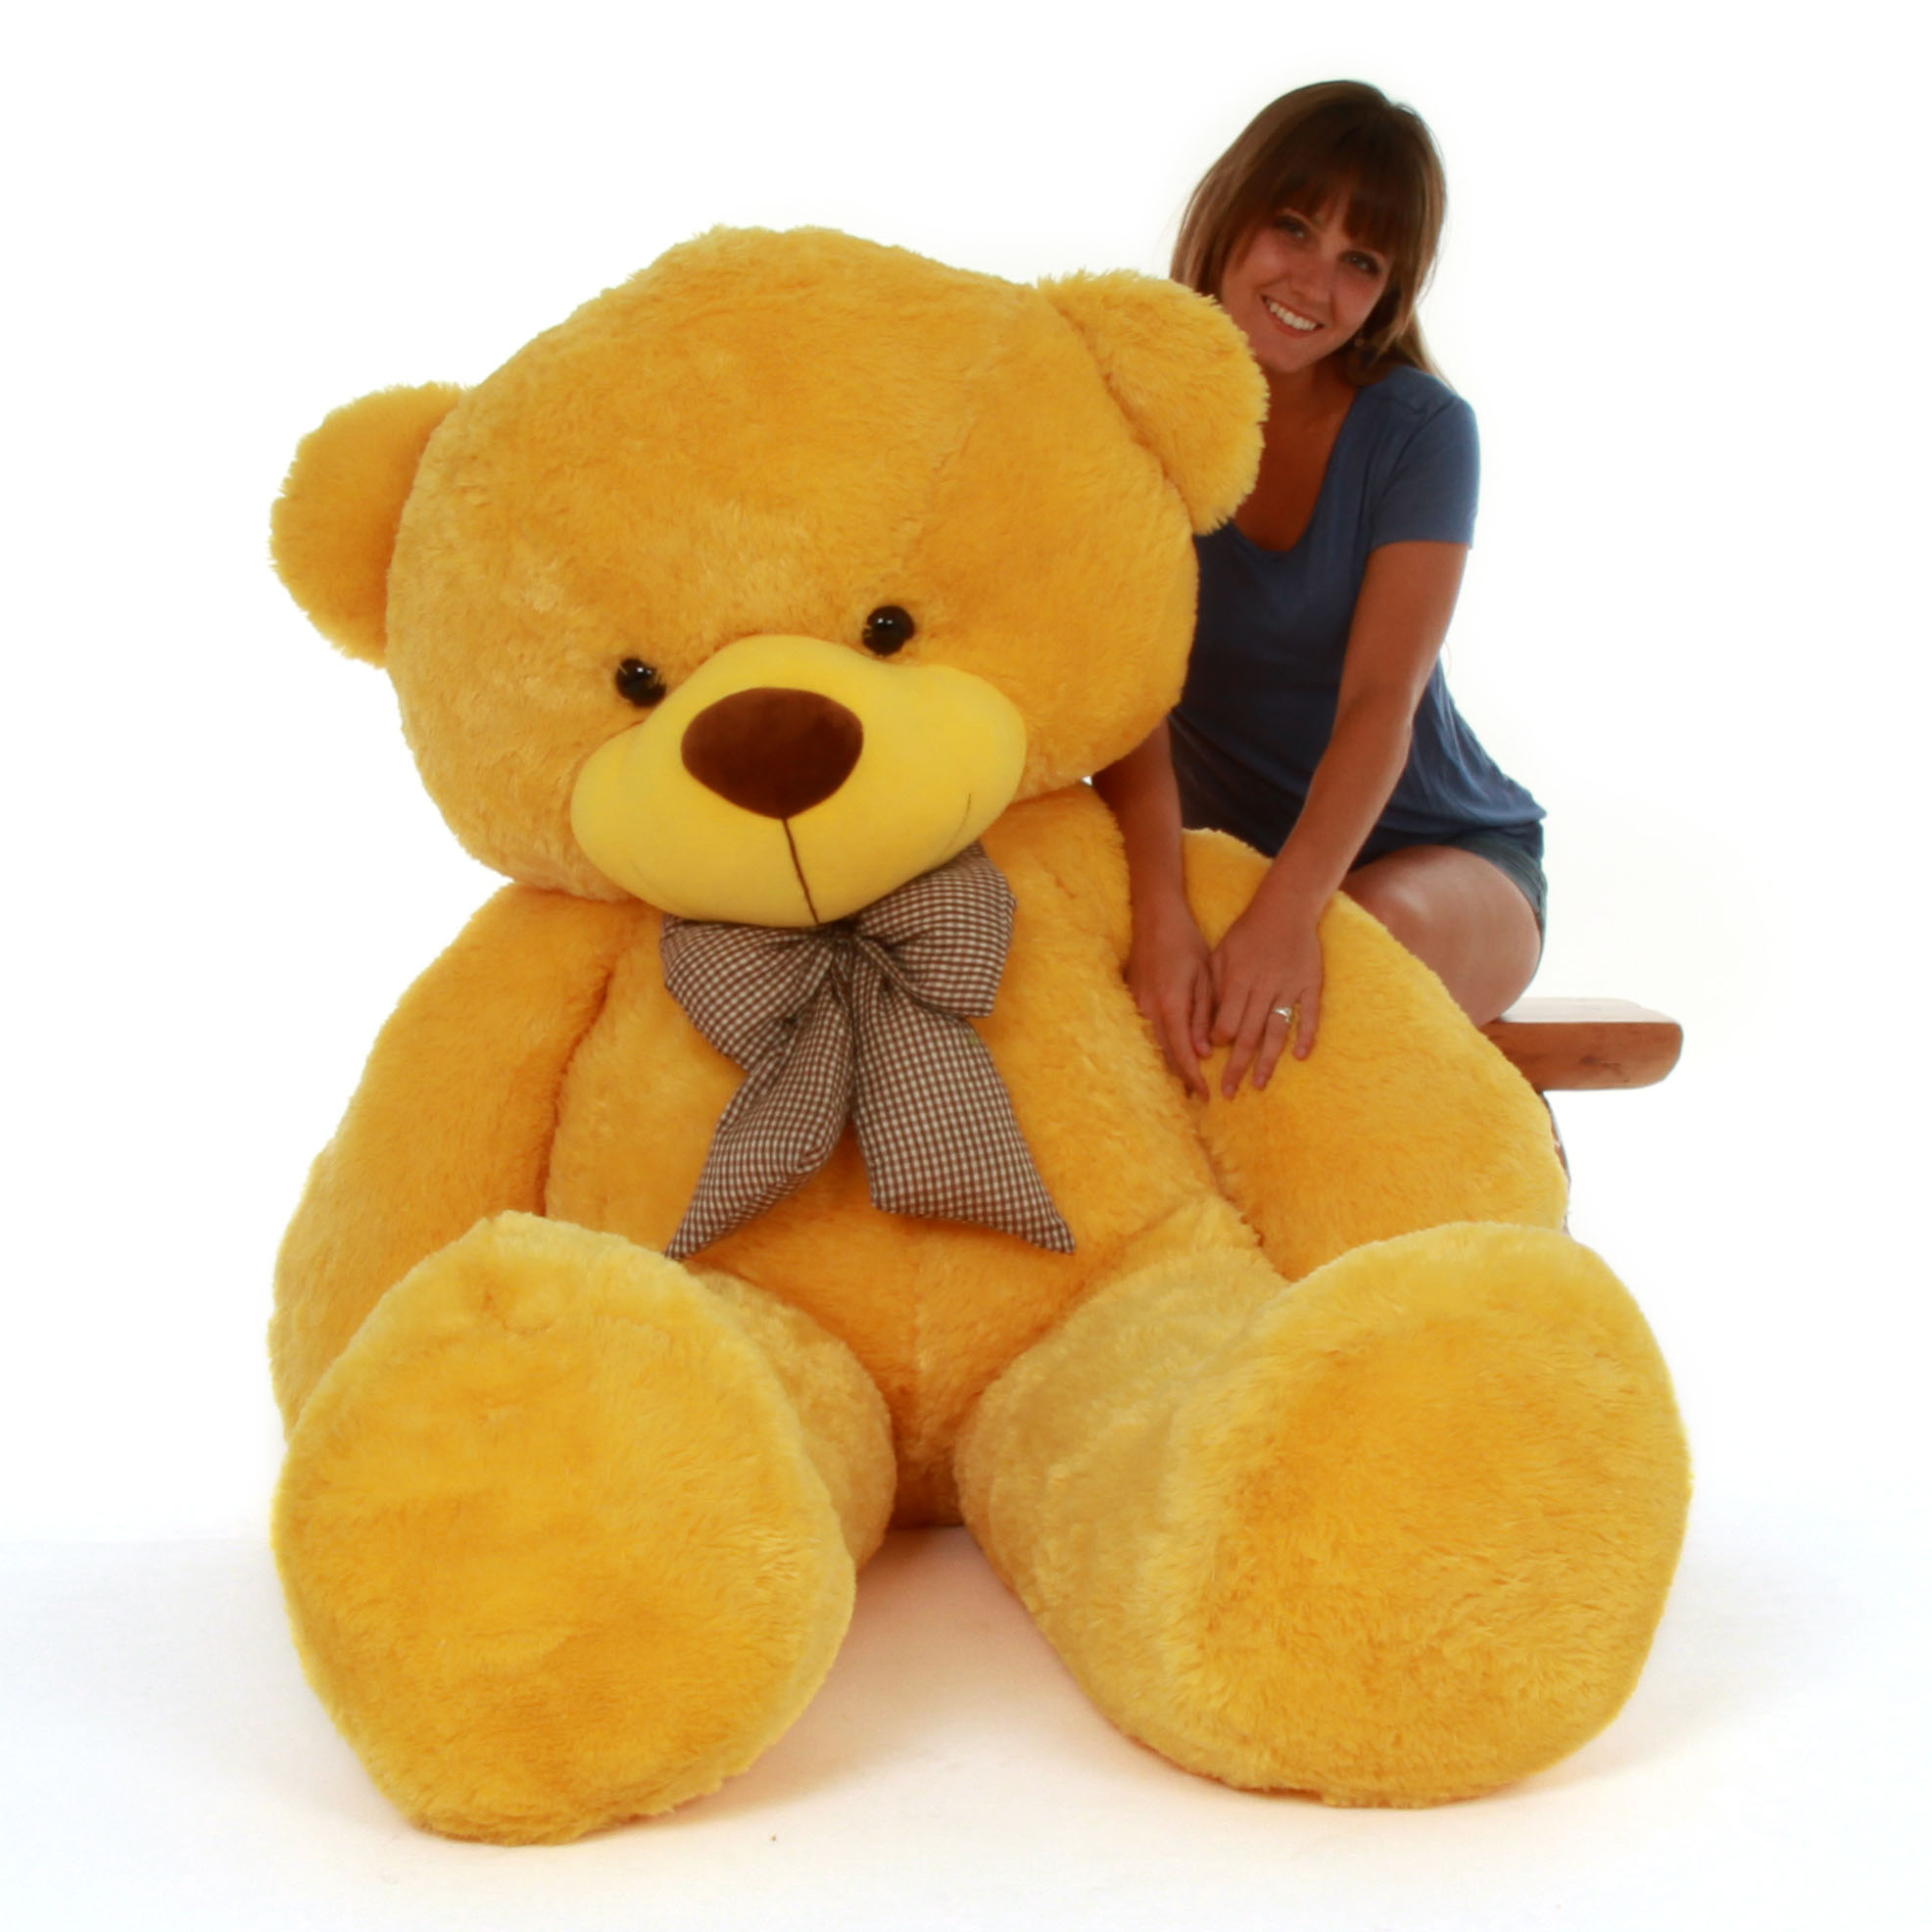 daisy-cuddles-adorable-huge-72in-yellow-teddy-bear-smiles-and-love-so-big-soft-and-huggable.jpg